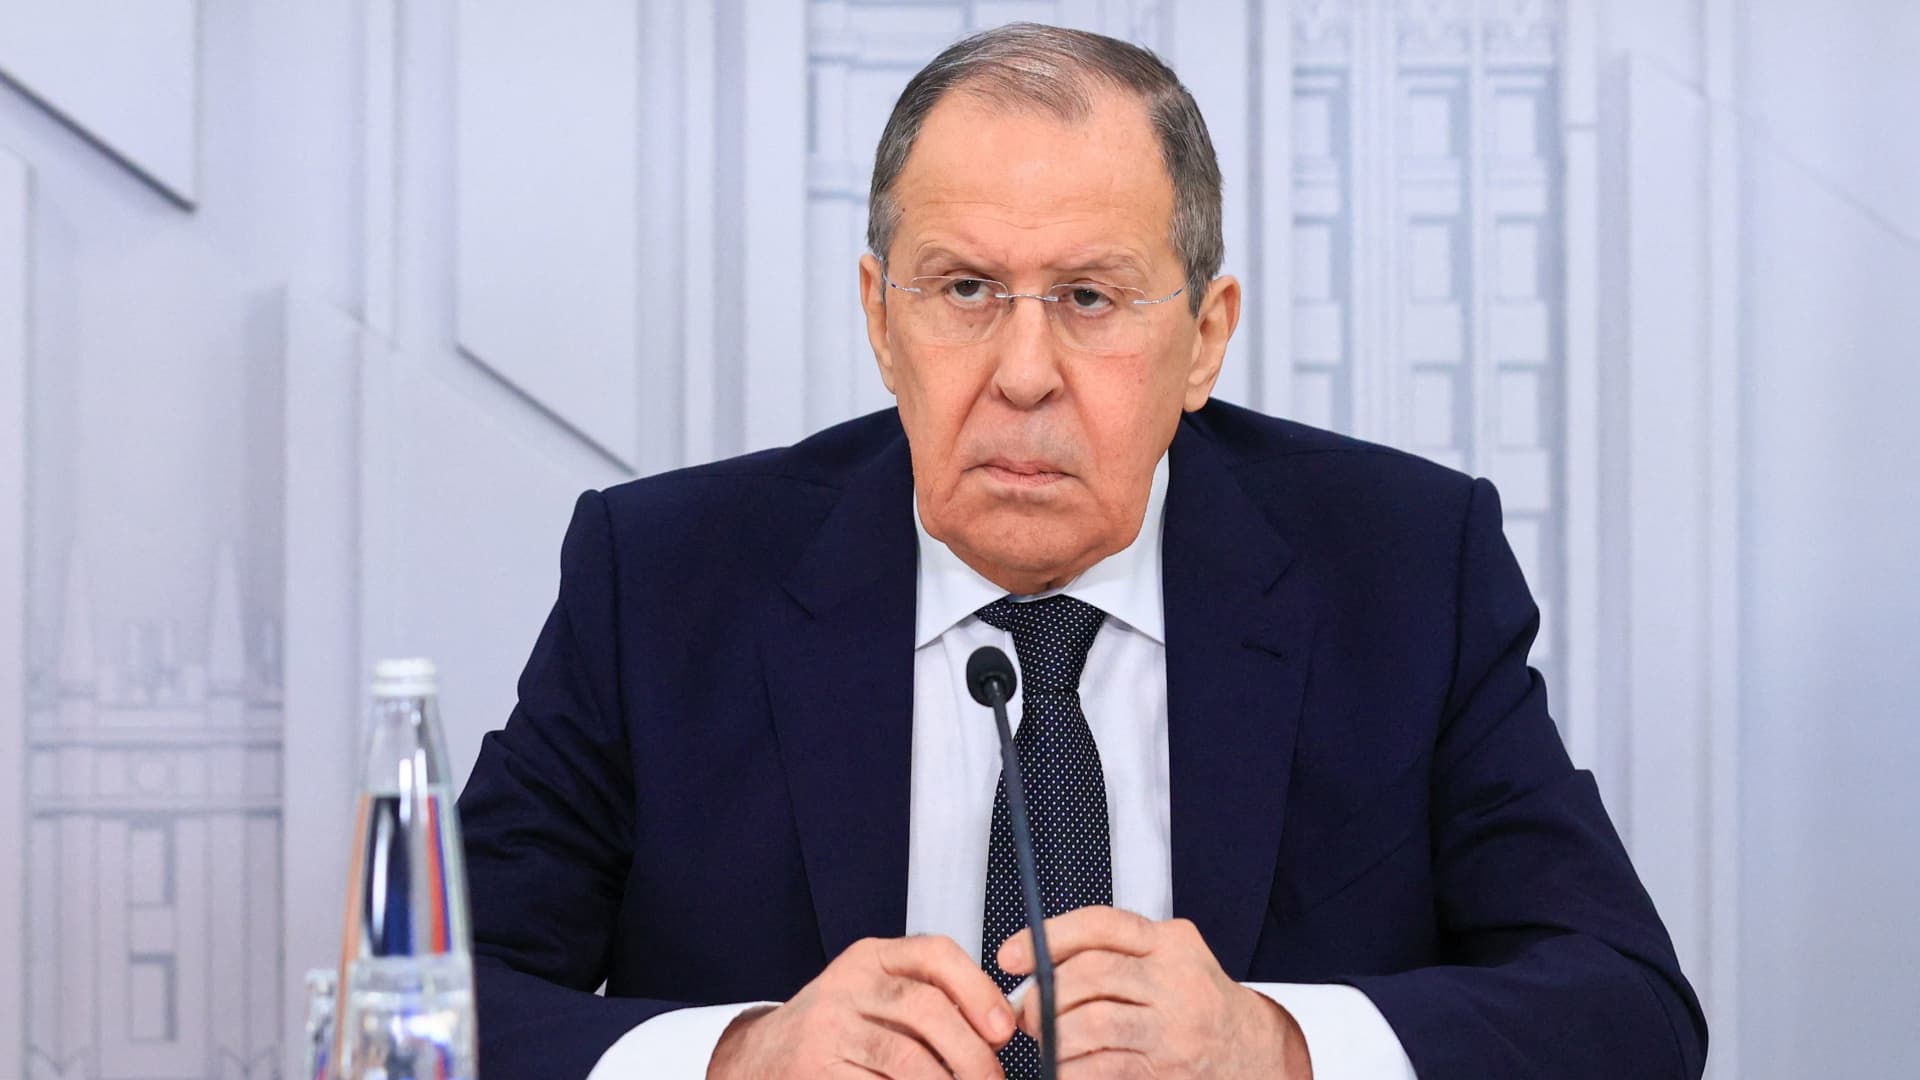 Russia's Foreign Minister Sergei Lavrov attends a news conference in Moscow, Russia June 6, 2022.